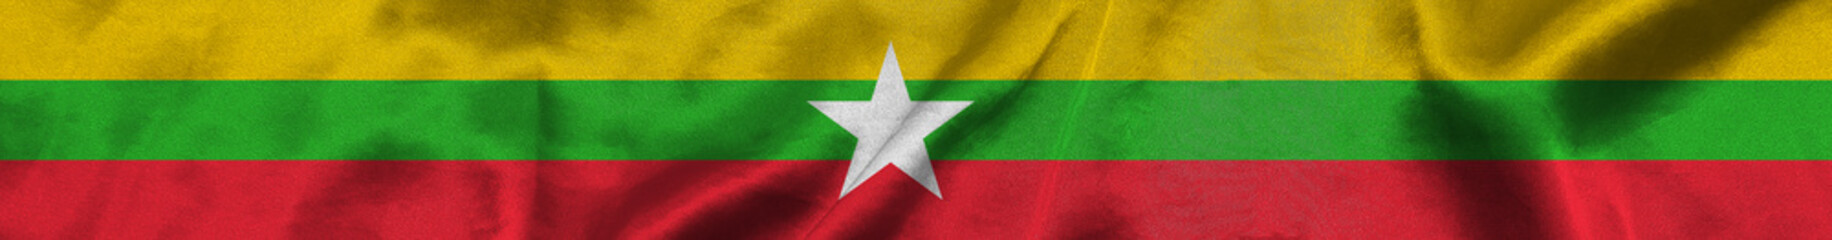 Elongated national flag of Myanmar with a fabric texture fluttering in the wind. Myanmar flag for website design. 3d illustration